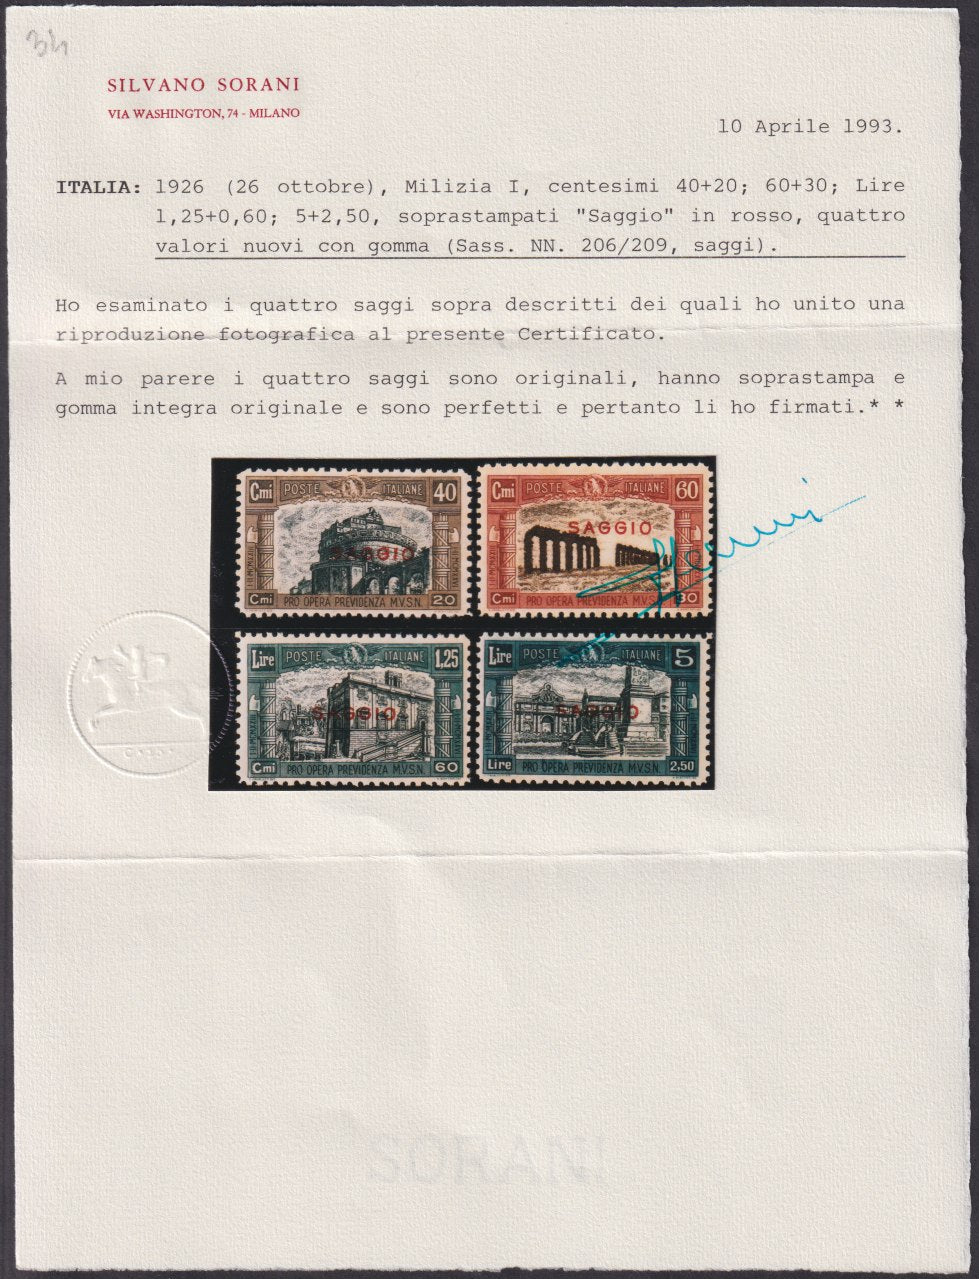 PP633 - 1926 - Militia 1st issue, complete new set with intact gum and SAGGIO overprint in red. (206/209).